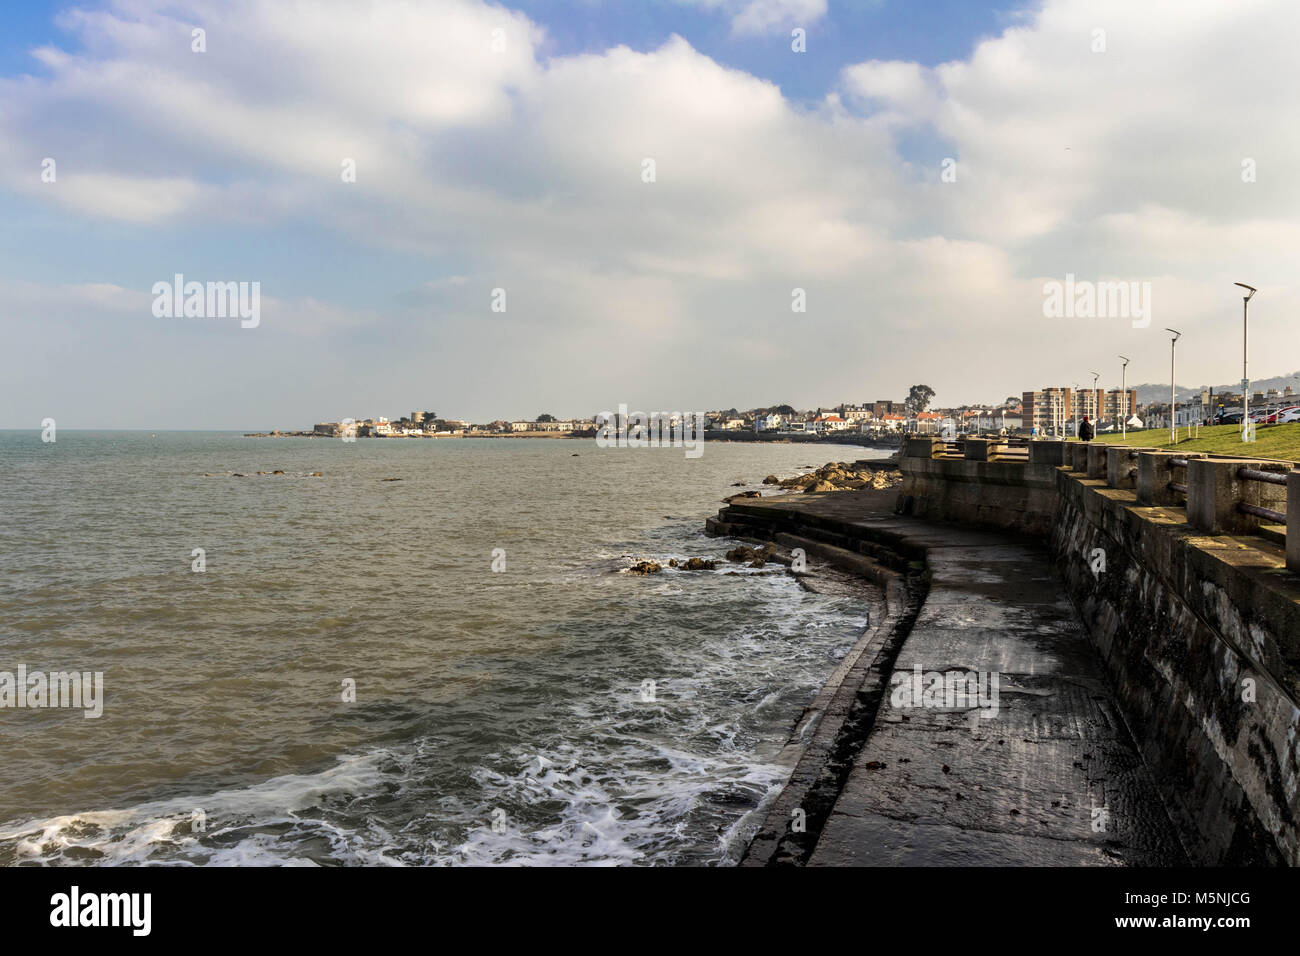 A view of the promenade at Scotsman Bay, Dun Laoghaire, Dublin. Stock Photo